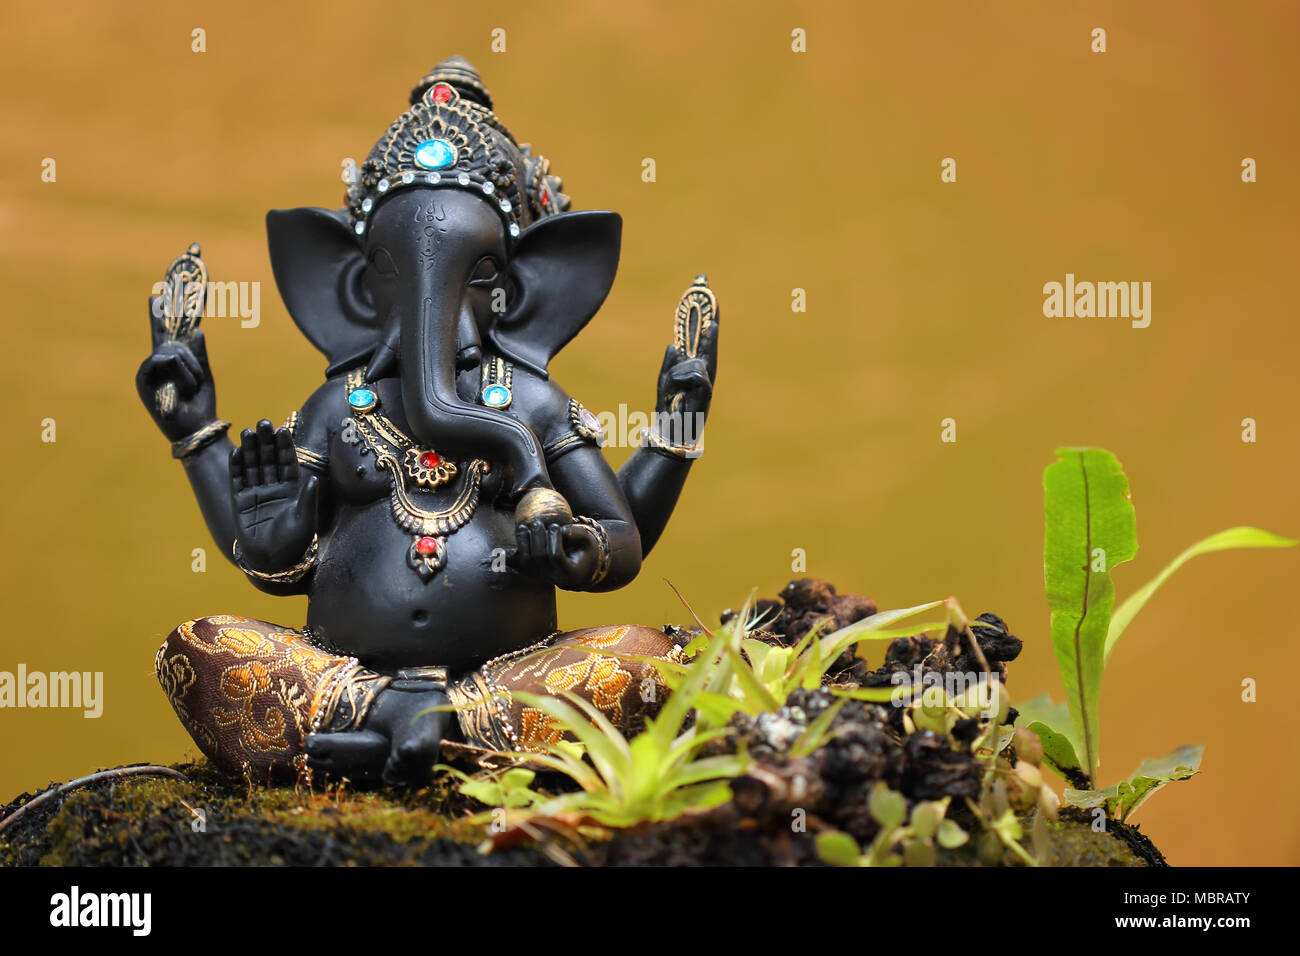 Ganesha, Hindu God with the head of the Elephant, is one of the most honored and beloved deities. Stock Photo